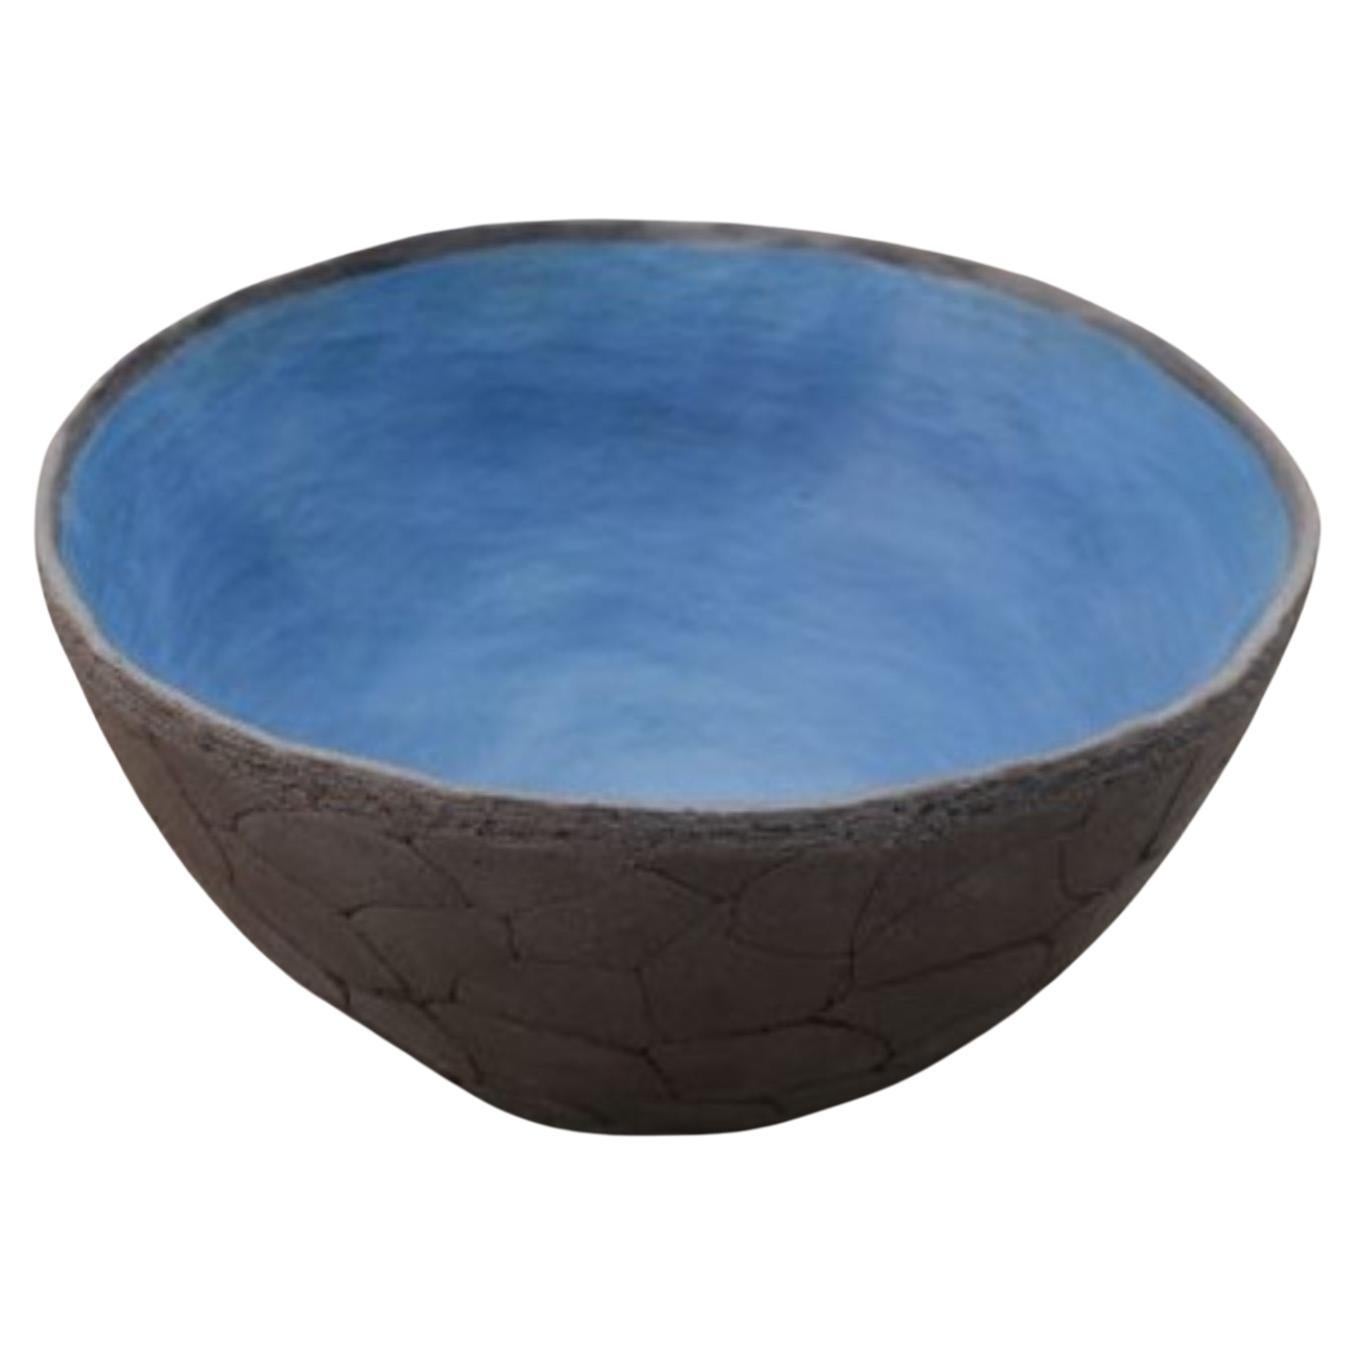 Small, High Bowl by Atelier Ledure For Sale